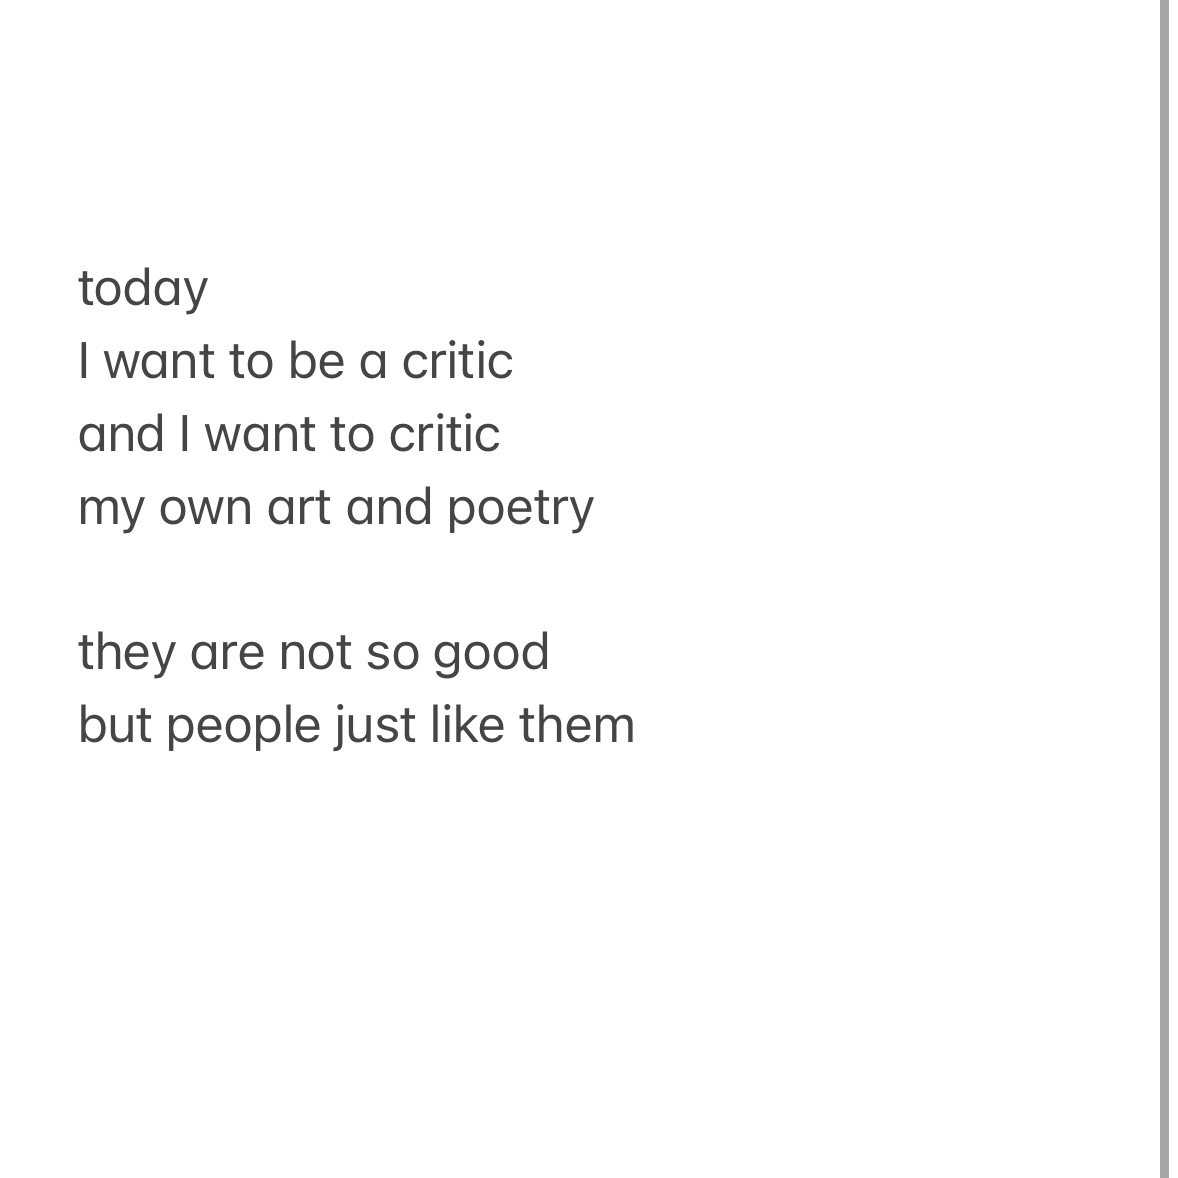 A Notes app screenshot with the text "todayI want to be a criticand I want to criticmy own art and poetrythey are not so goodbut people like them